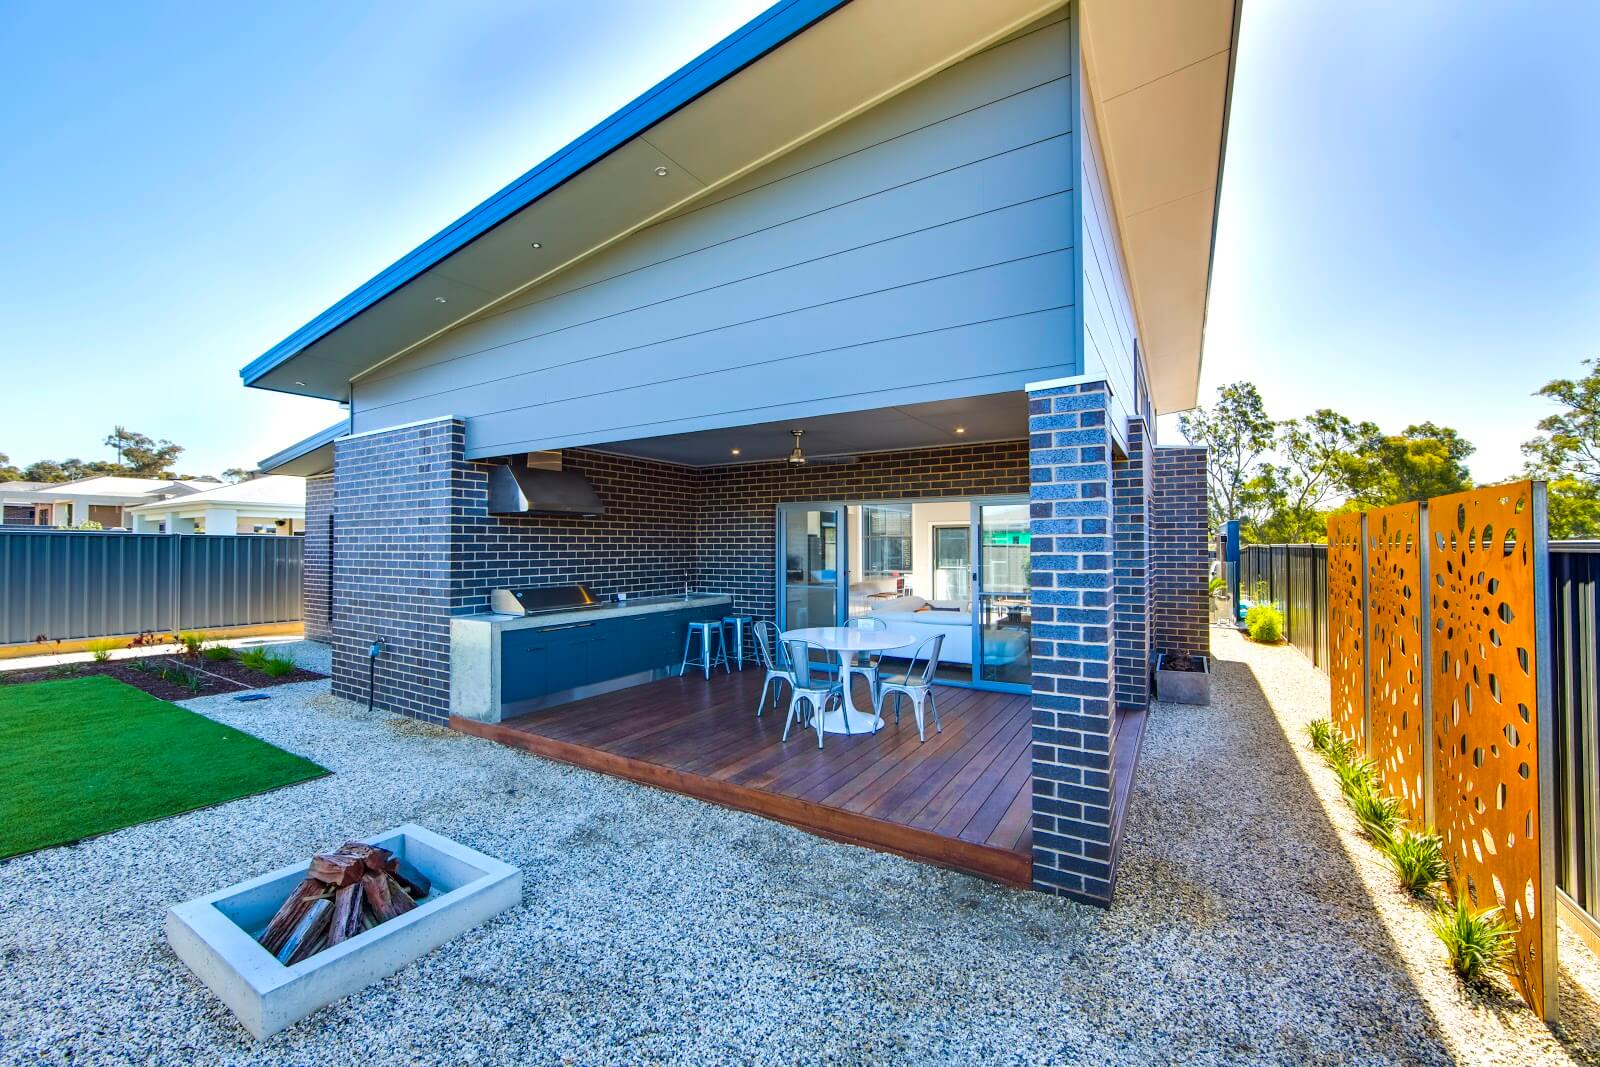 Home in a Bushfire Prone Area - Spark Proof House